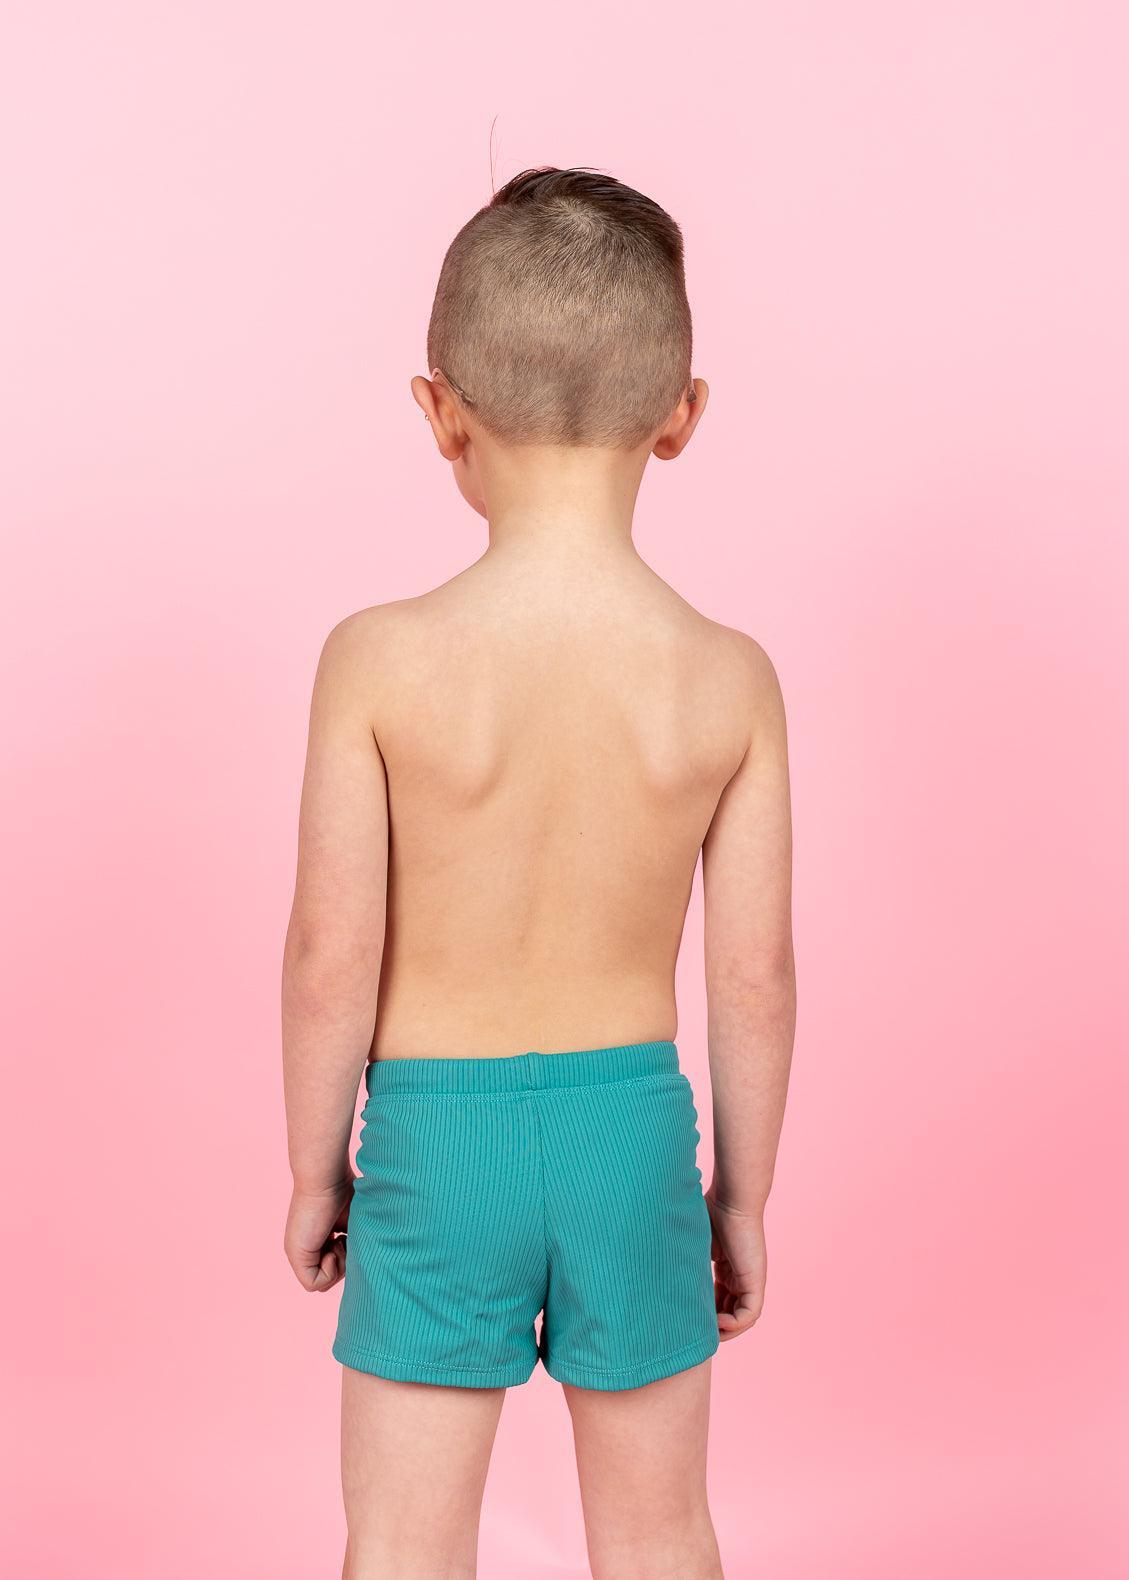 Boys Swimsuit - Shorts  - Ribbed Teal Waves